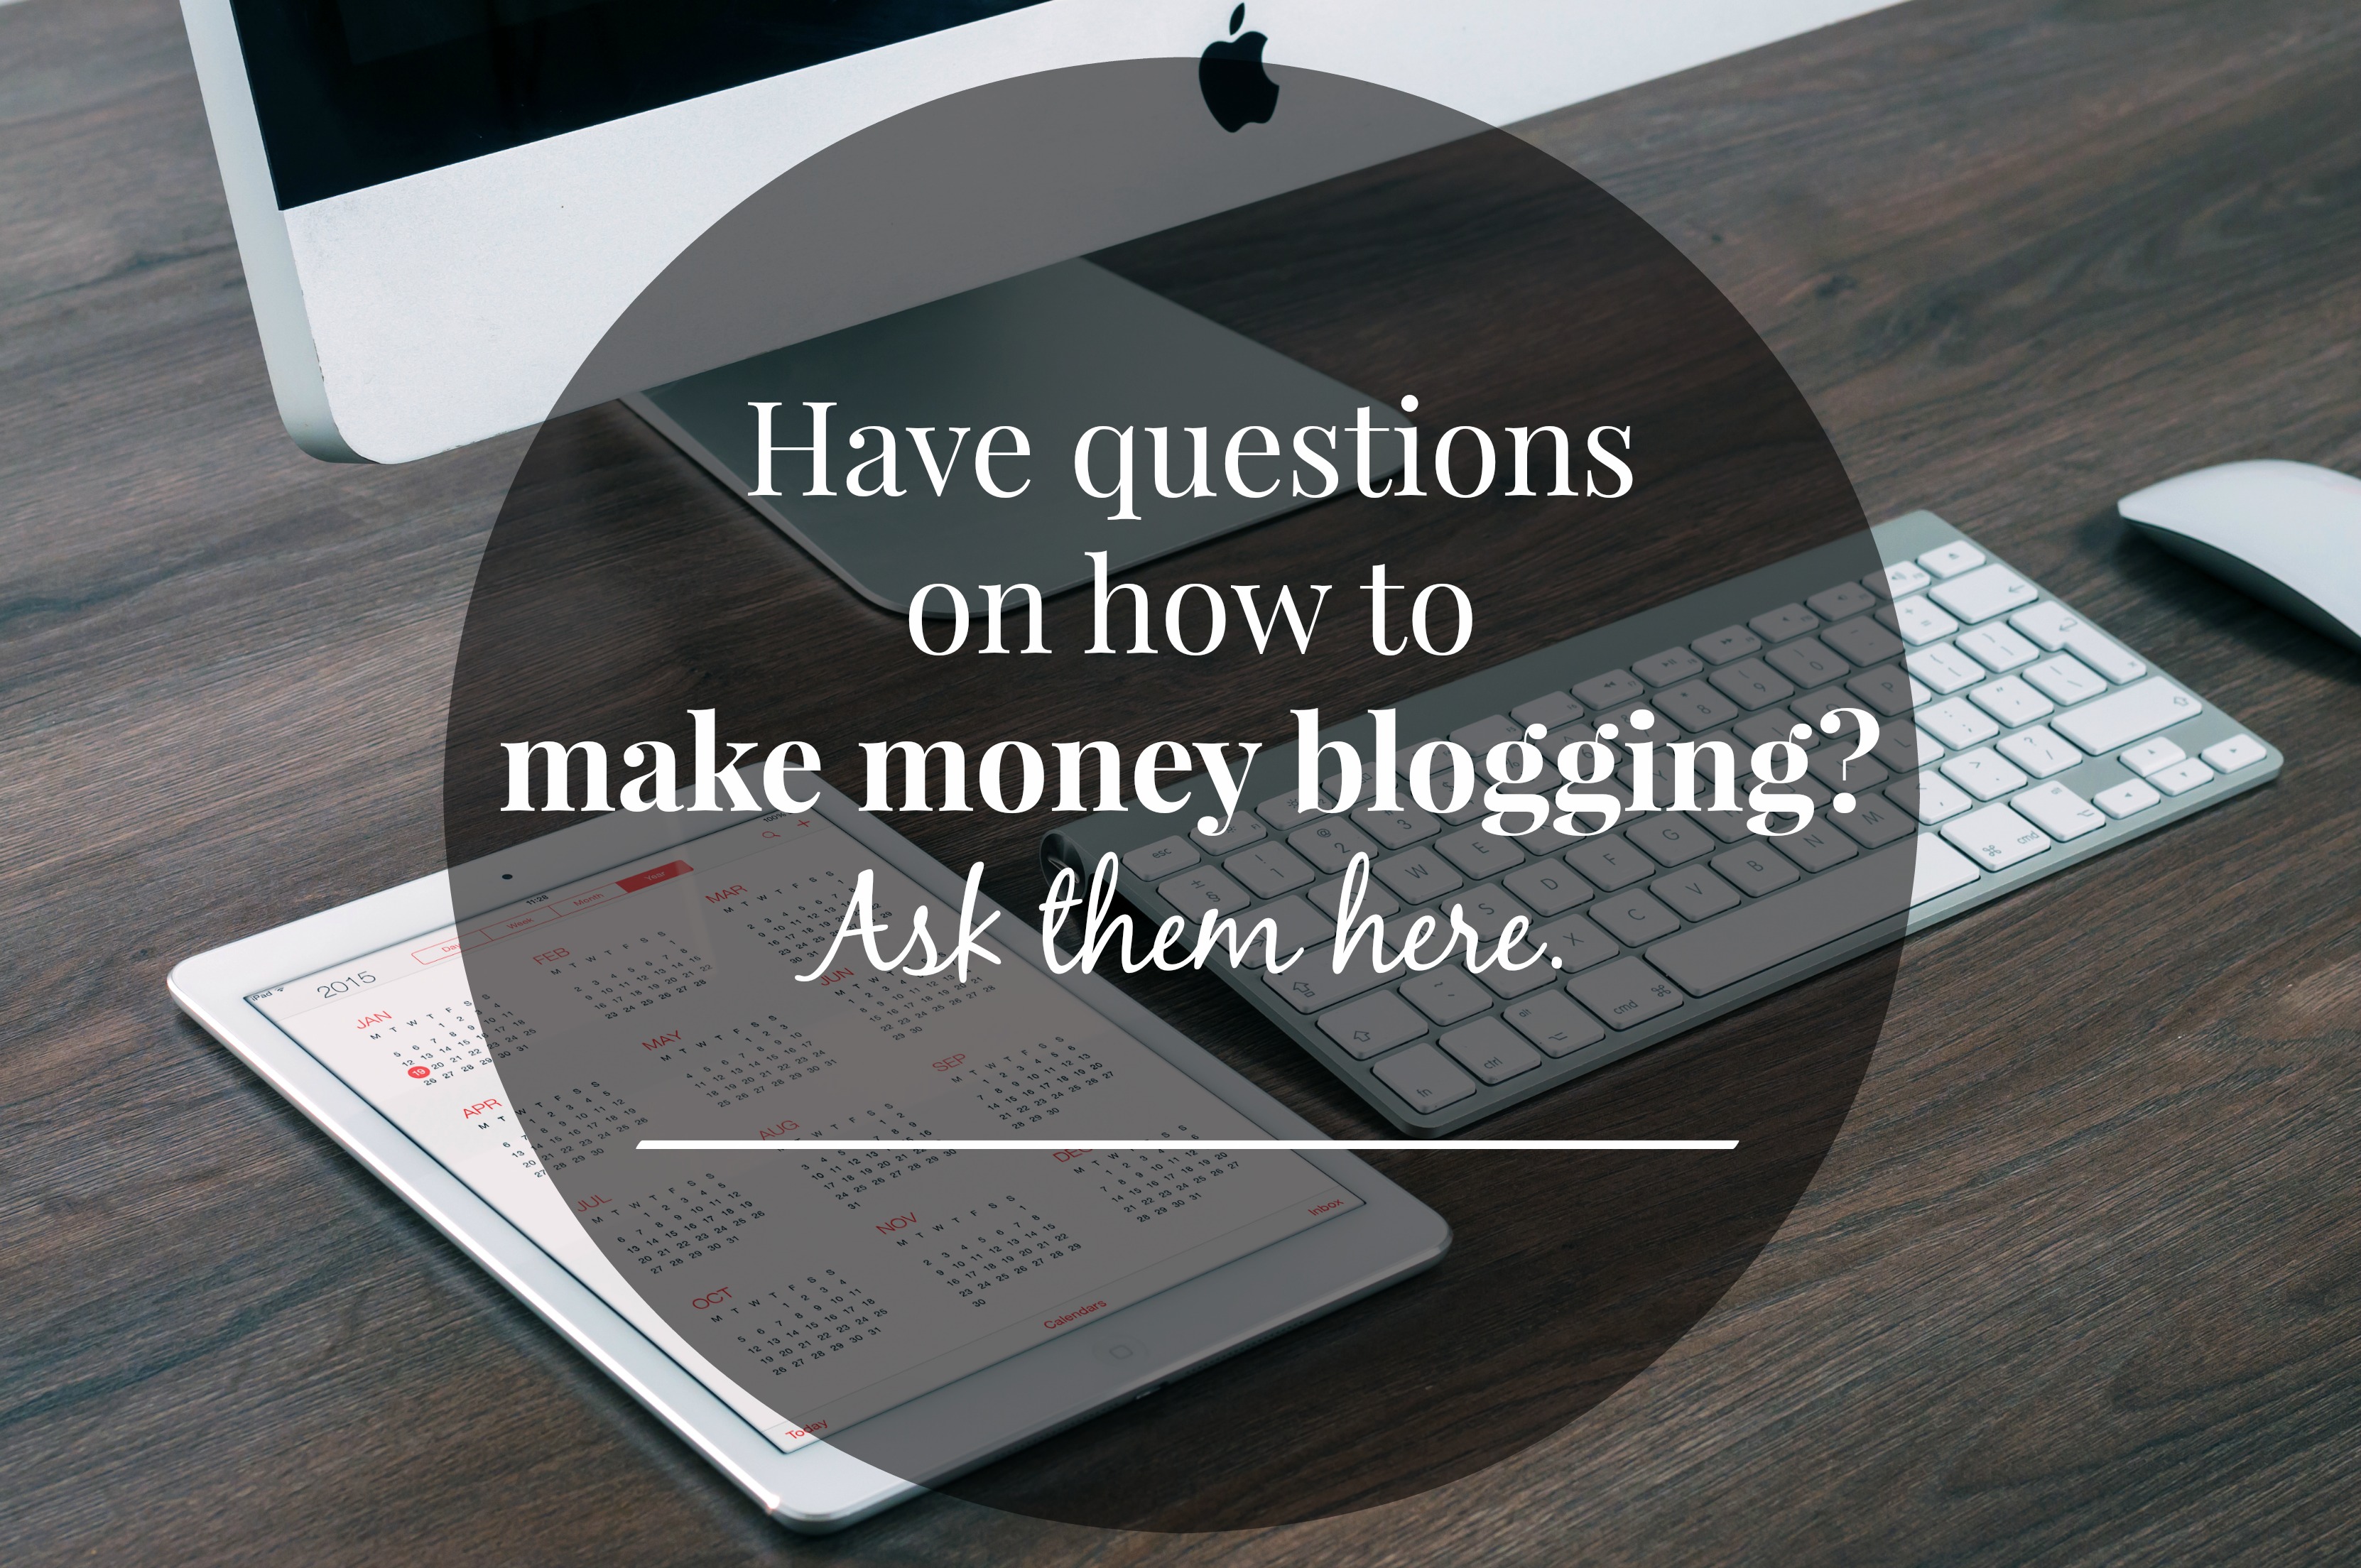 Have questions on how to make money blogging?